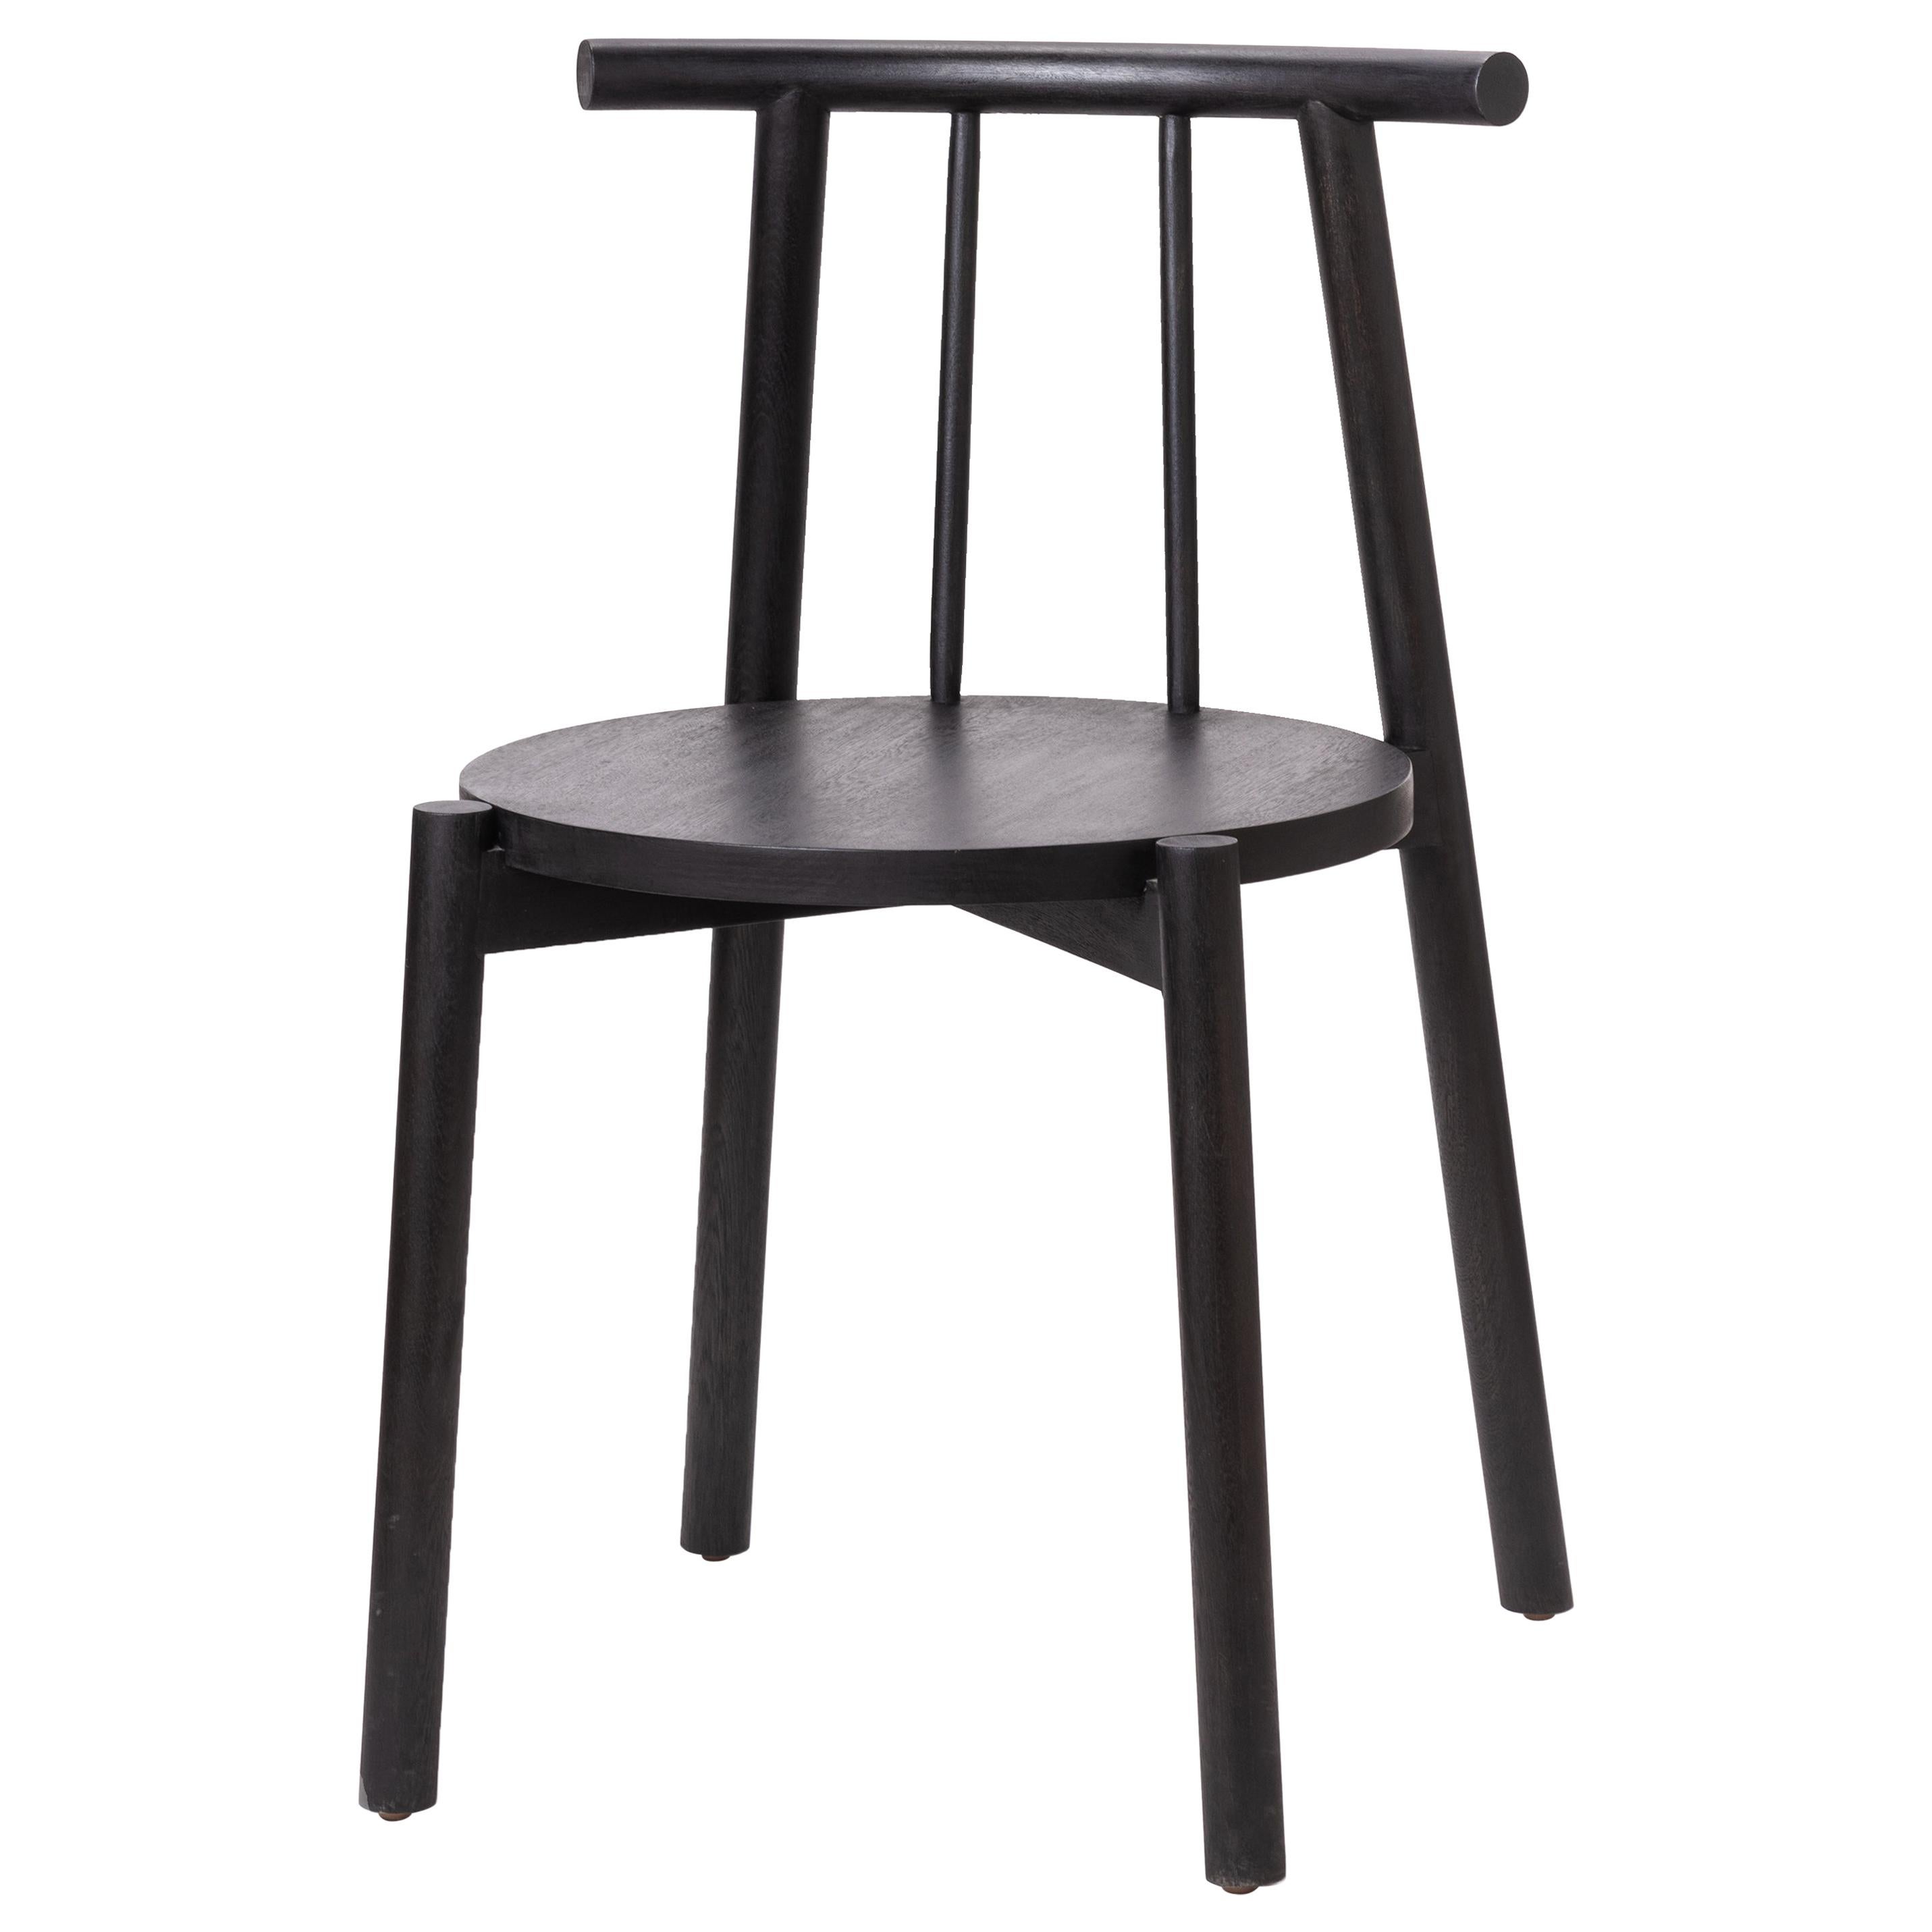 Black Side Chair, Dinning Chair Crafted in Solid Oak Wood Designed by Luis Vega